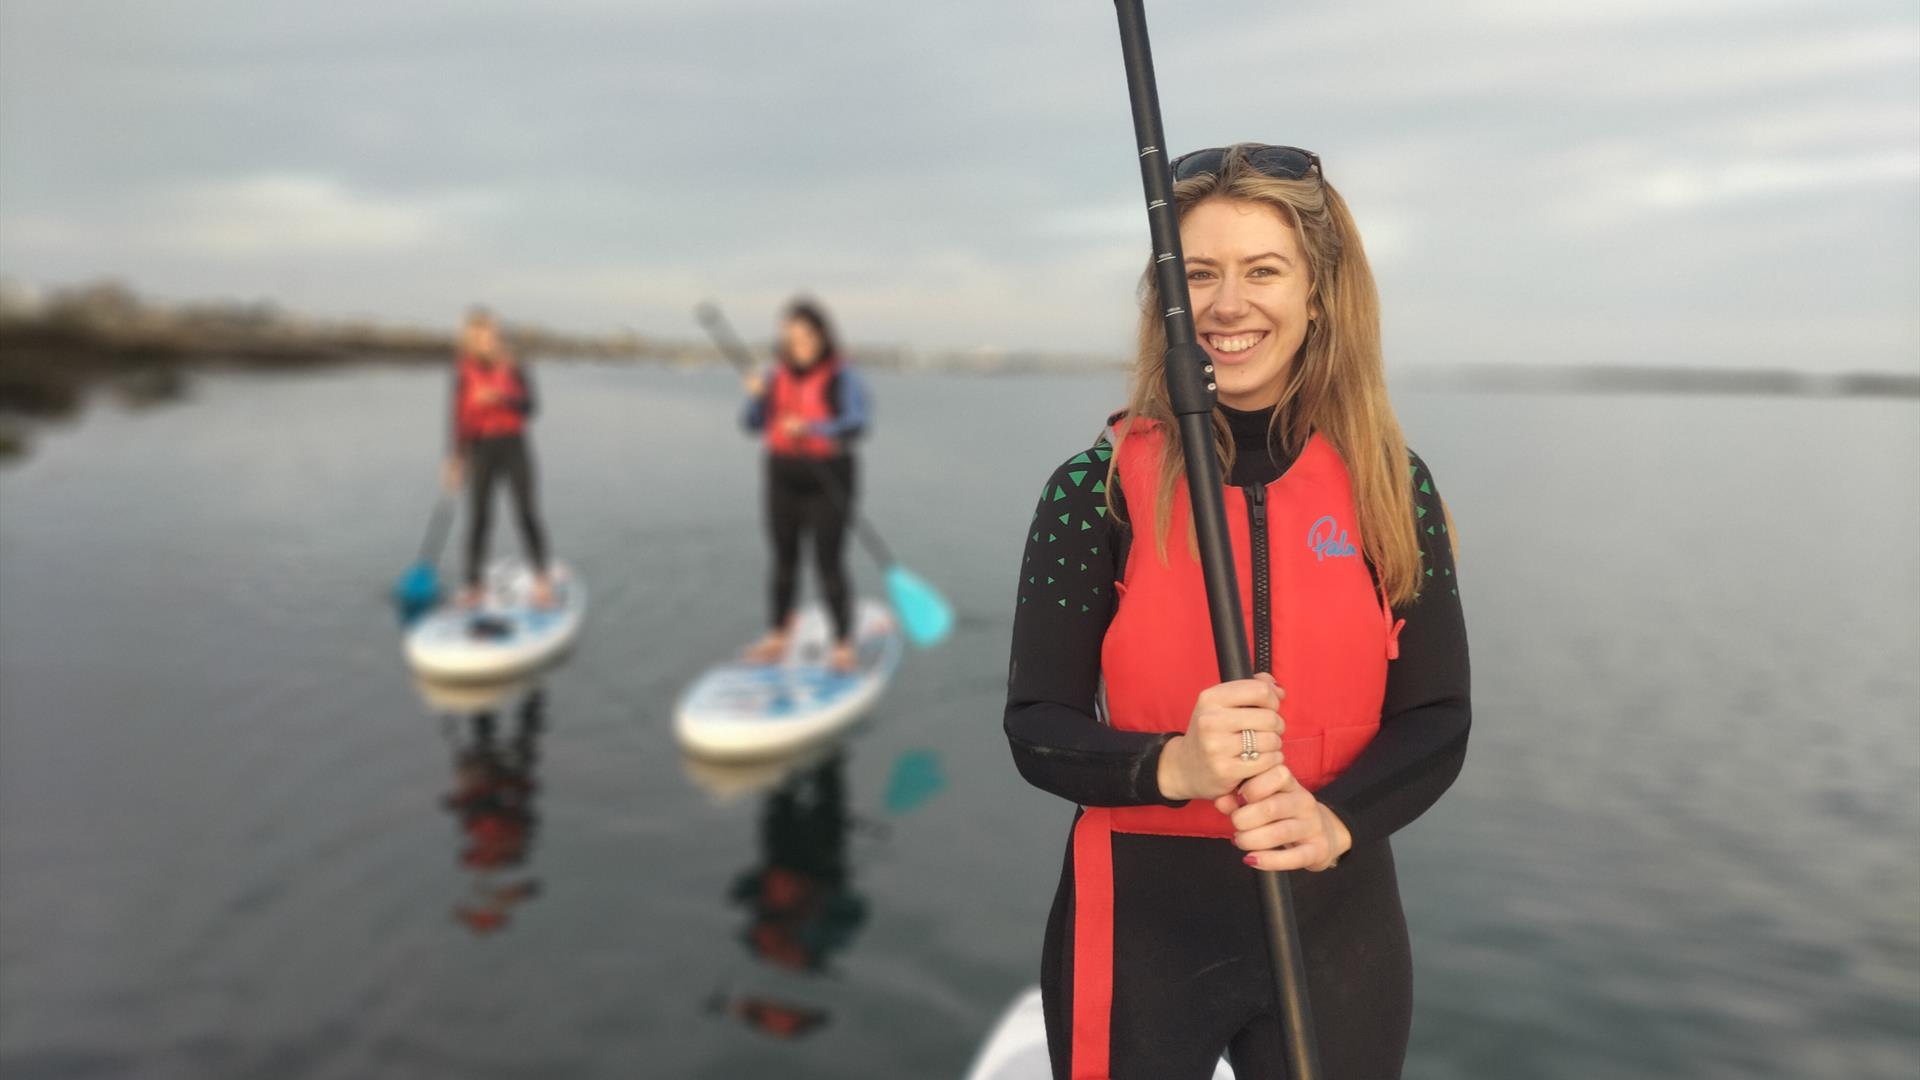 Big smiles on the Paddy's Day Paddle